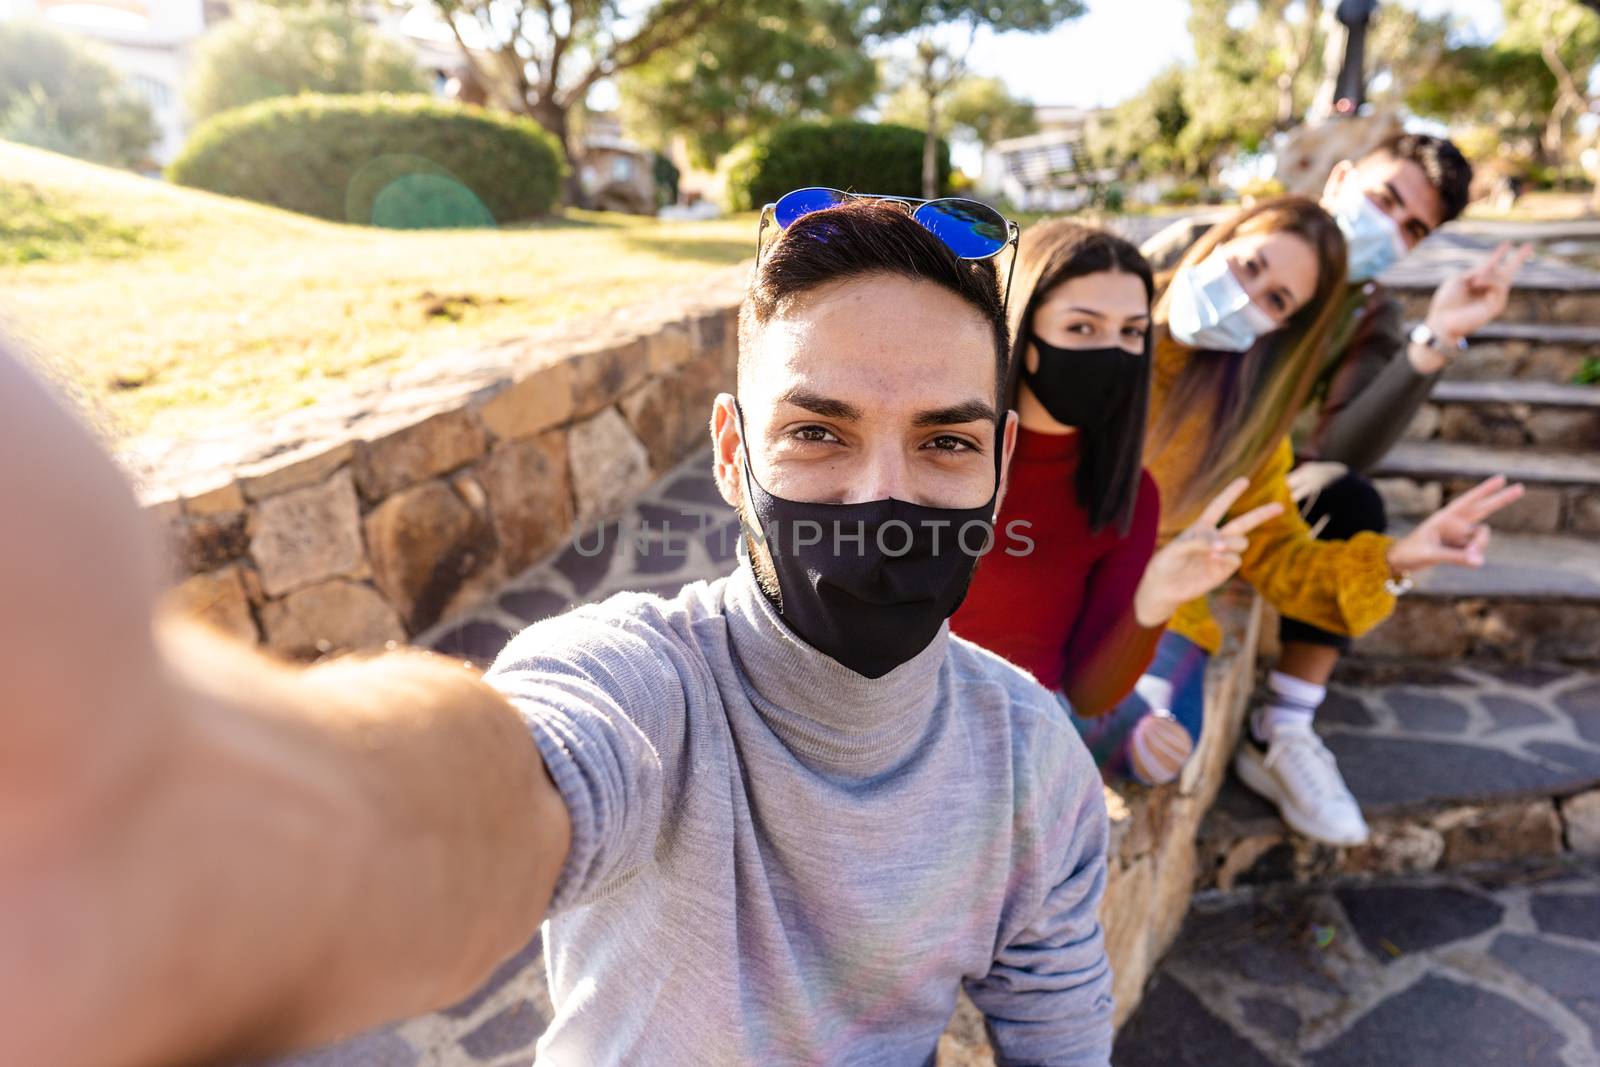 Outdoor group portrait of happy young people with medical mask - Millennial man take a selfie with his friends lined up behind him - New normal outdoor activity with Coronavirus pandemic by robbyfontanesi